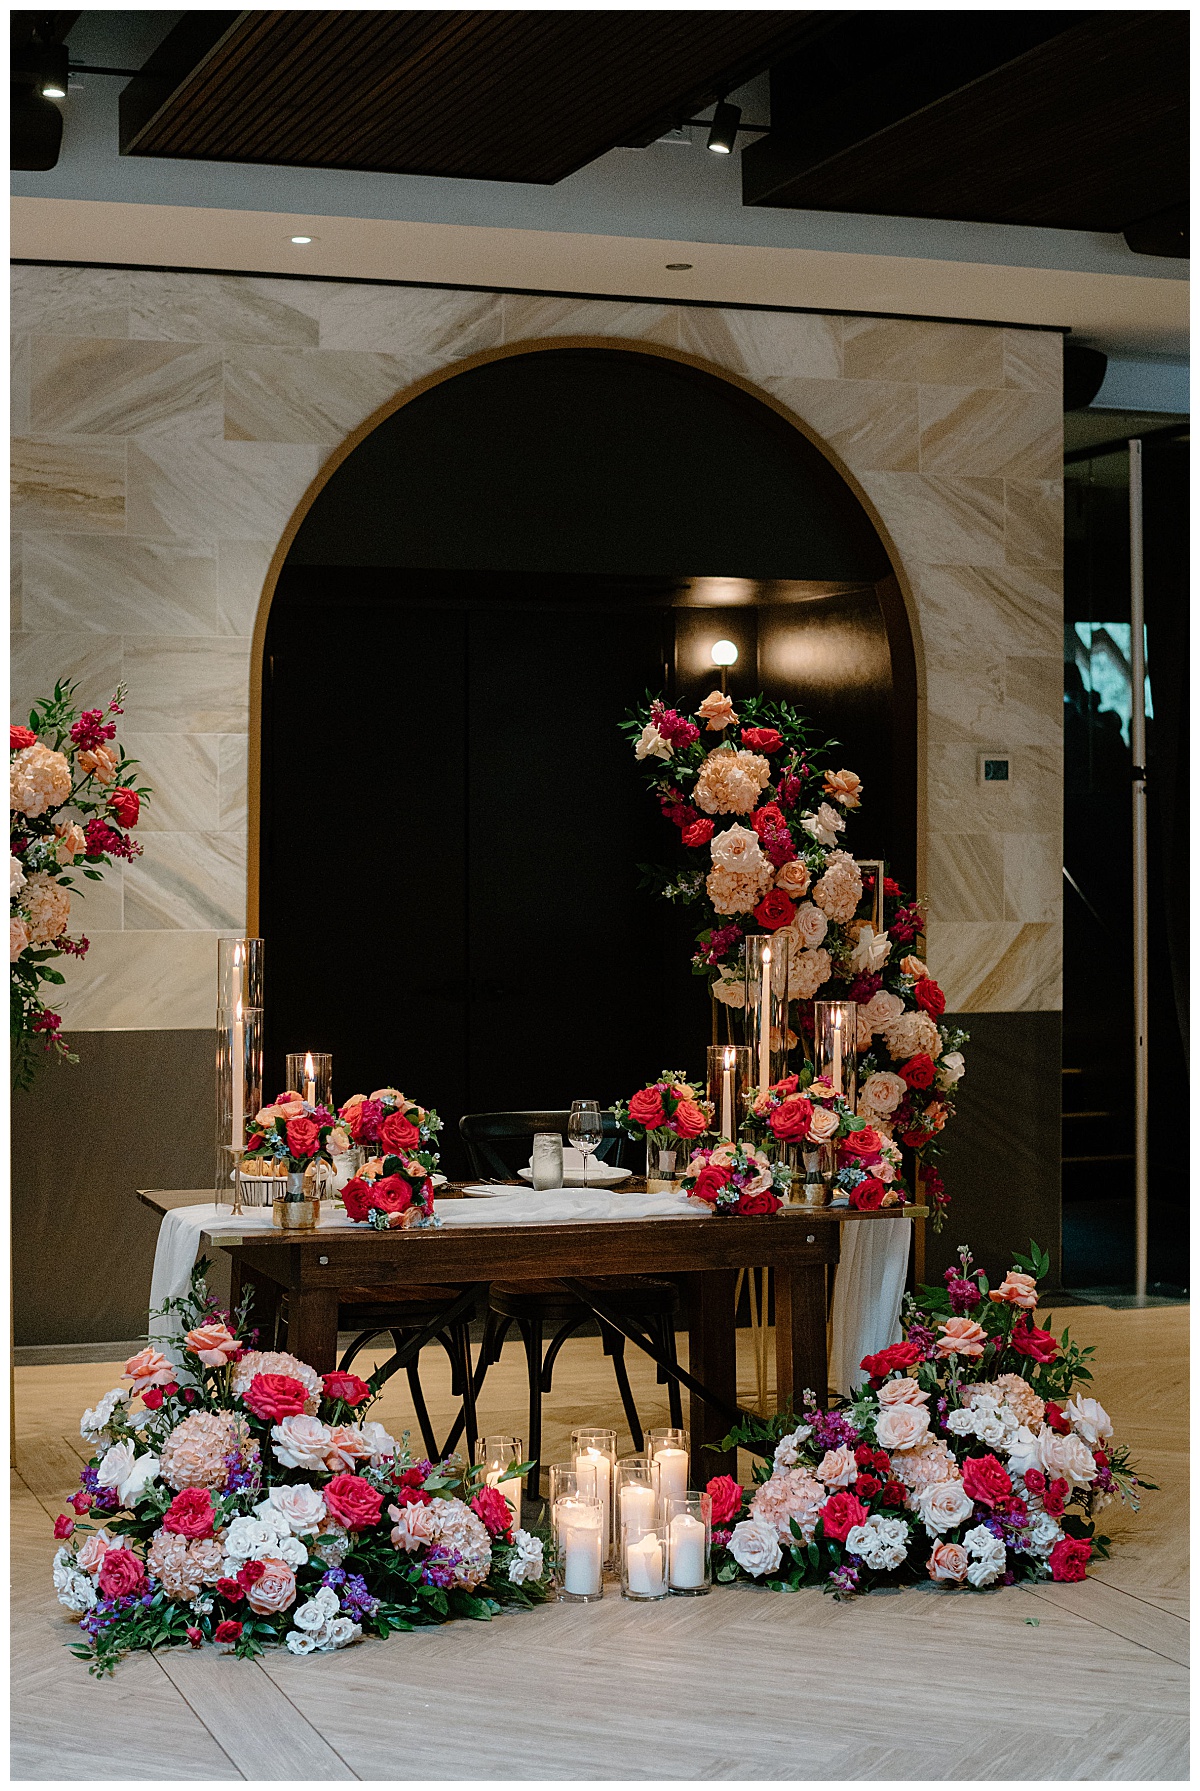 sweetheart table surrounded by lush floral arches and arrangements by Midwest wedding photographer